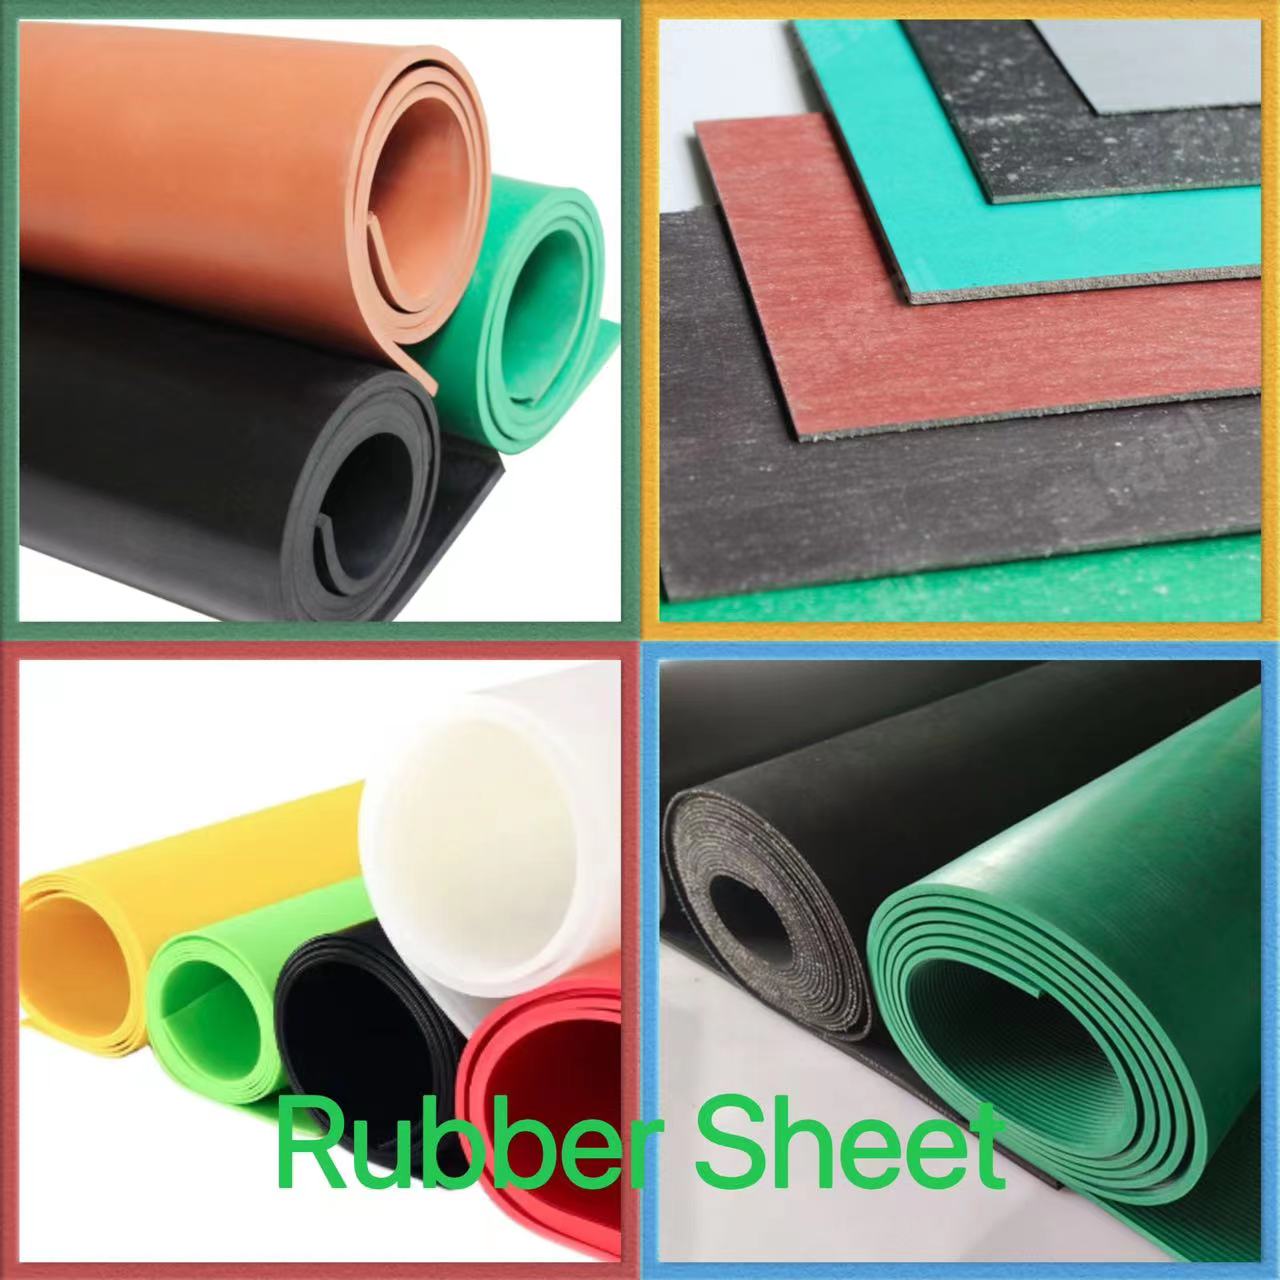 Production Process and Classification of Rubber Sheet